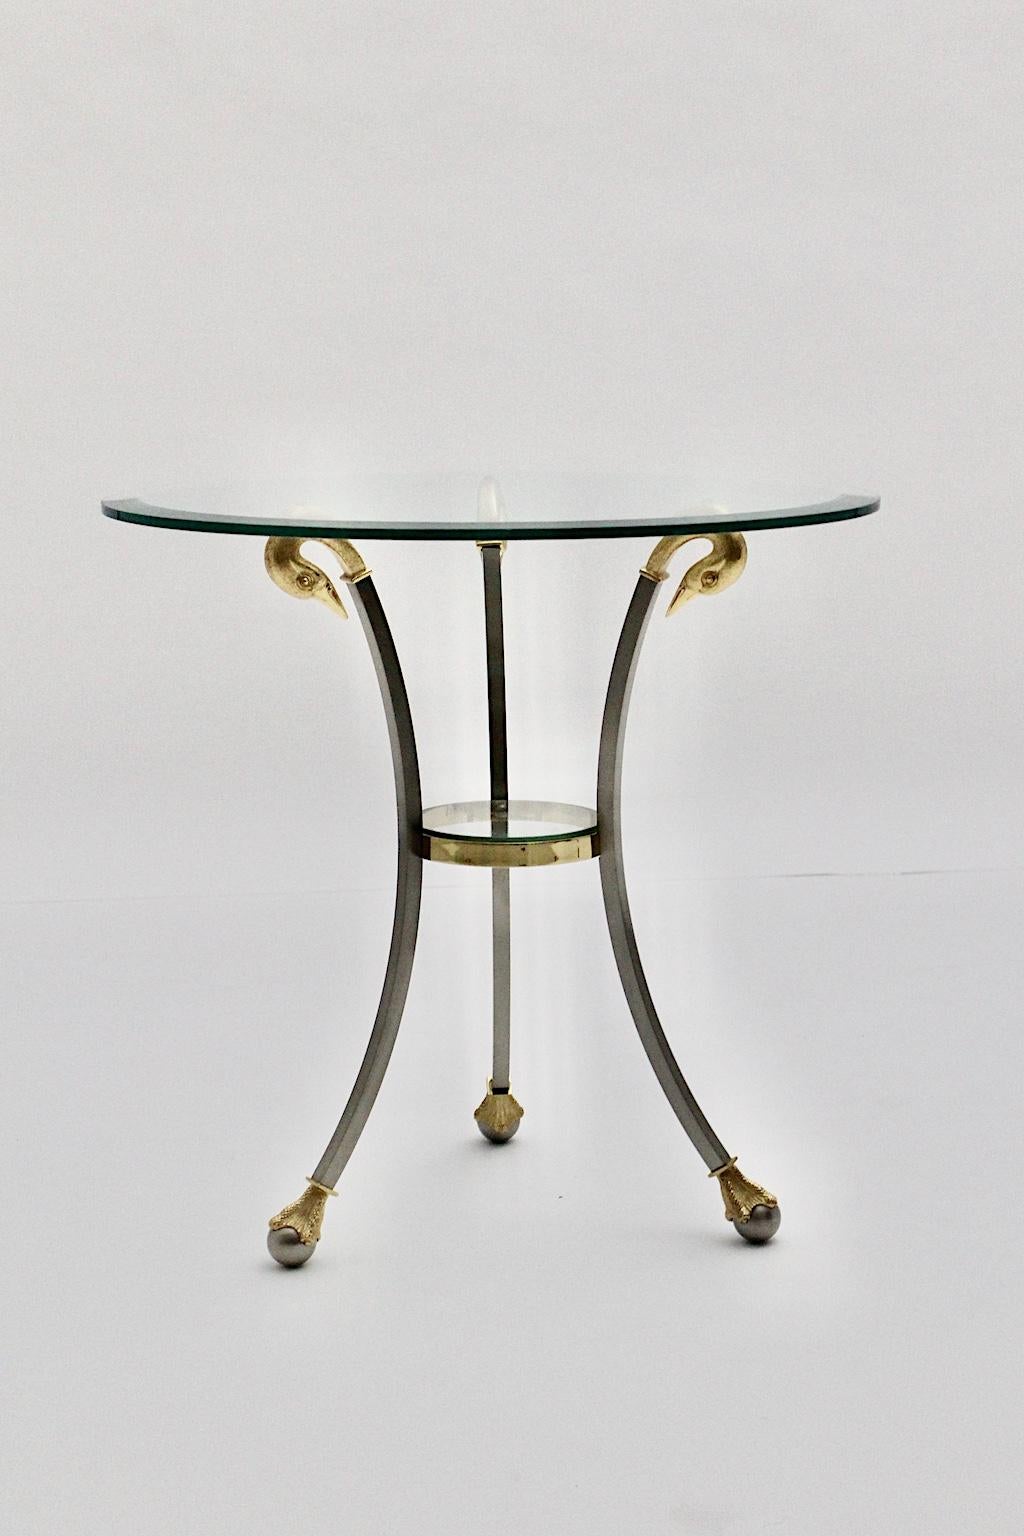 Hollywood Regency Style Maison Jansen Gold Chrome Circular Side Table Sofa Table In Good Condition For Sale In Vienna, AT